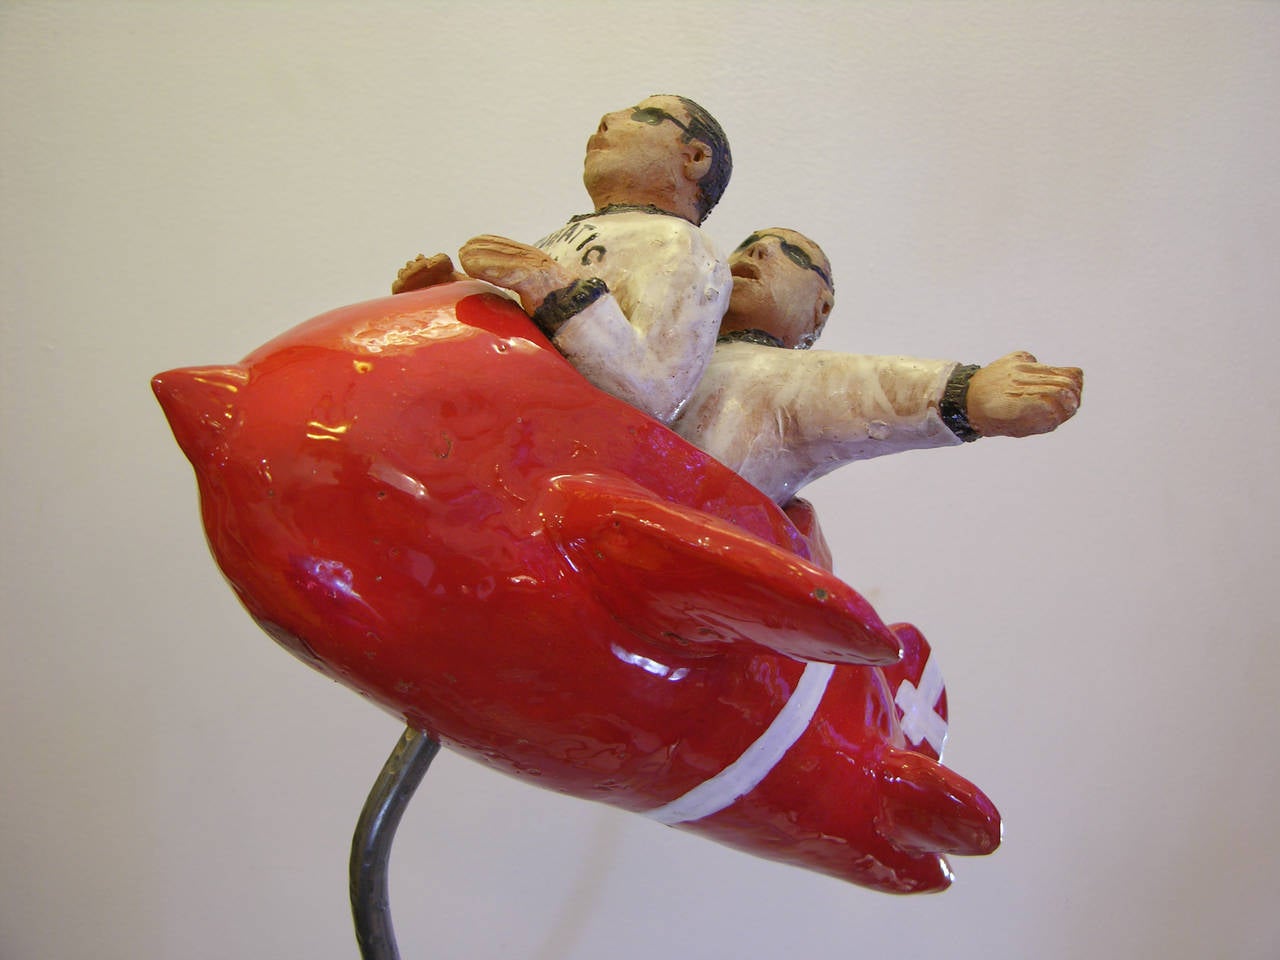 Modern Contemporary Italian Red White Sculpture, Flying Guys in Airplane by Ginestroni